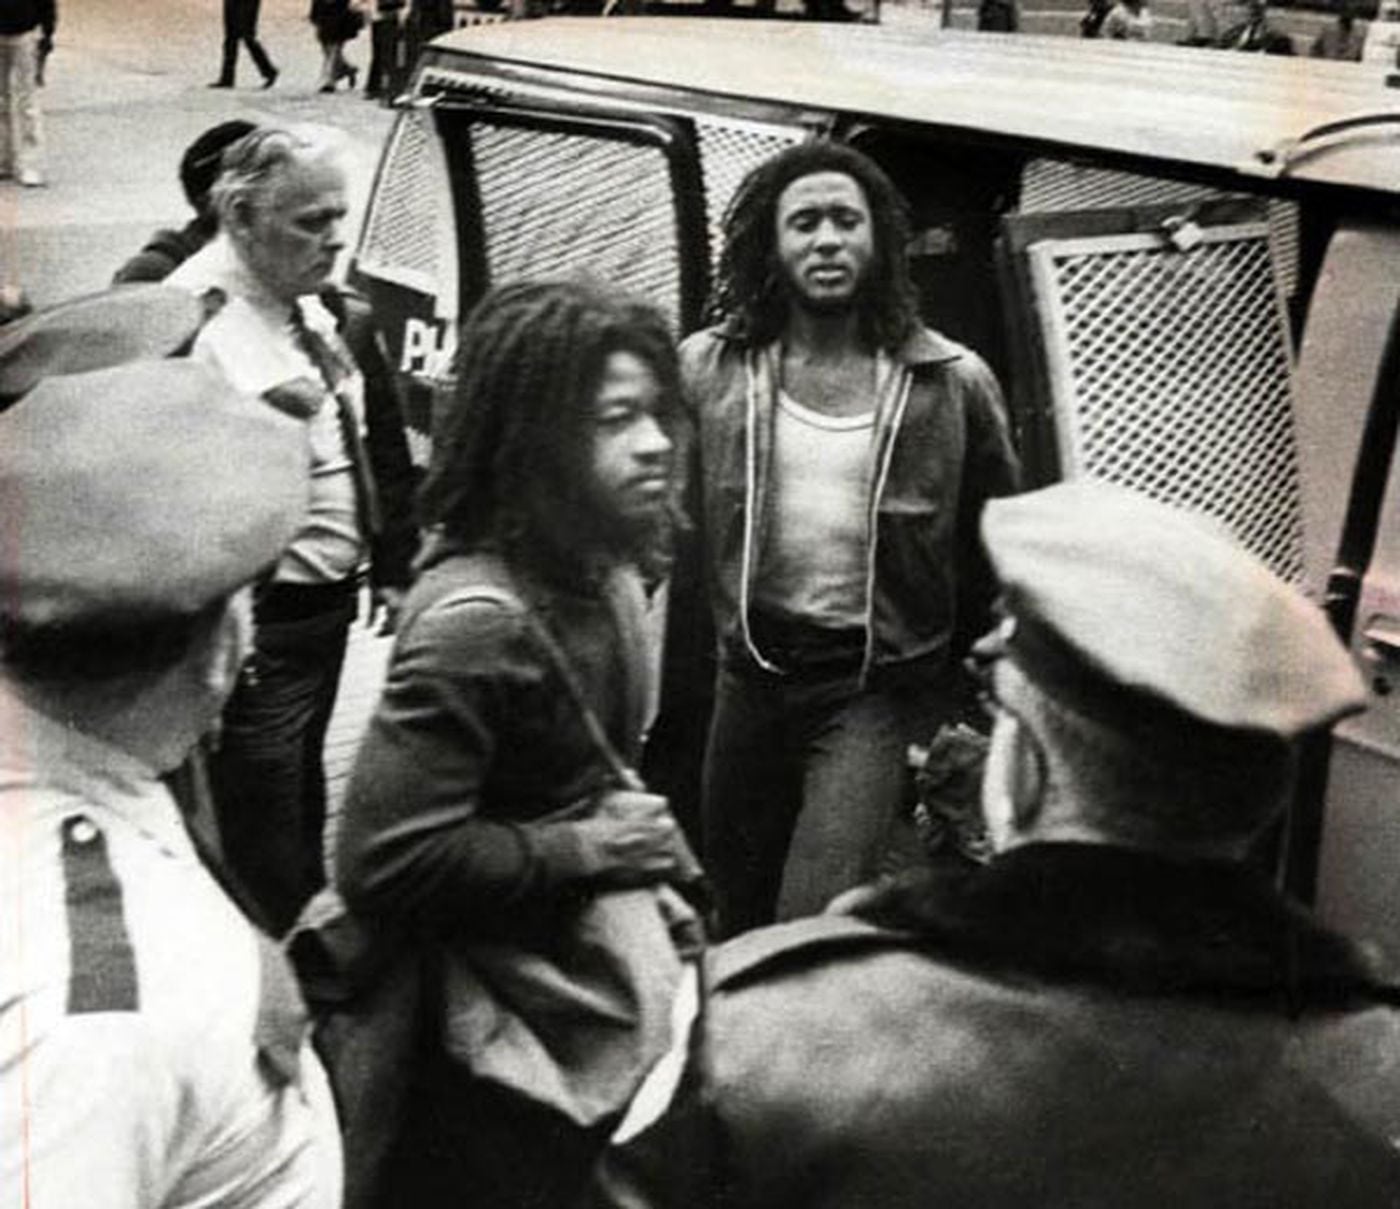 Delbert                       Africa (center) glares at deputies as he and                       Chuckie Africa leave court at City Hall during                       their 1979 trial for the murder of Officer James                       Ramp. Nine MOVE members were convicted.